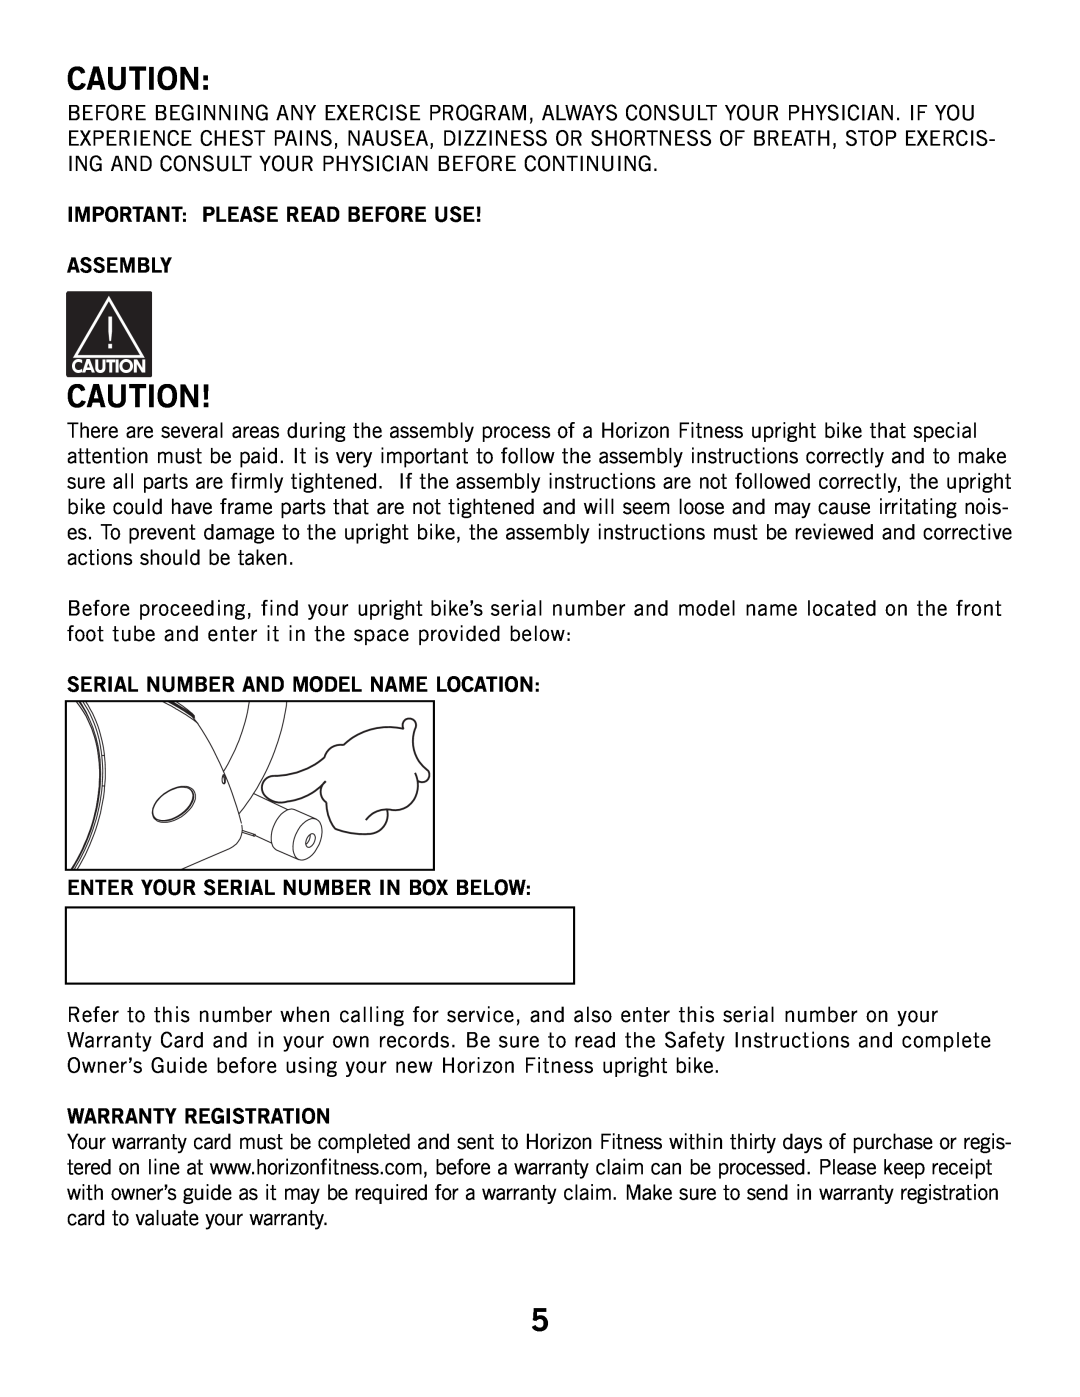 Horizon Fitness 2.1B, 3.1B manual Important Please Read Before Use Assembly, Serial Number And Model Name Location 